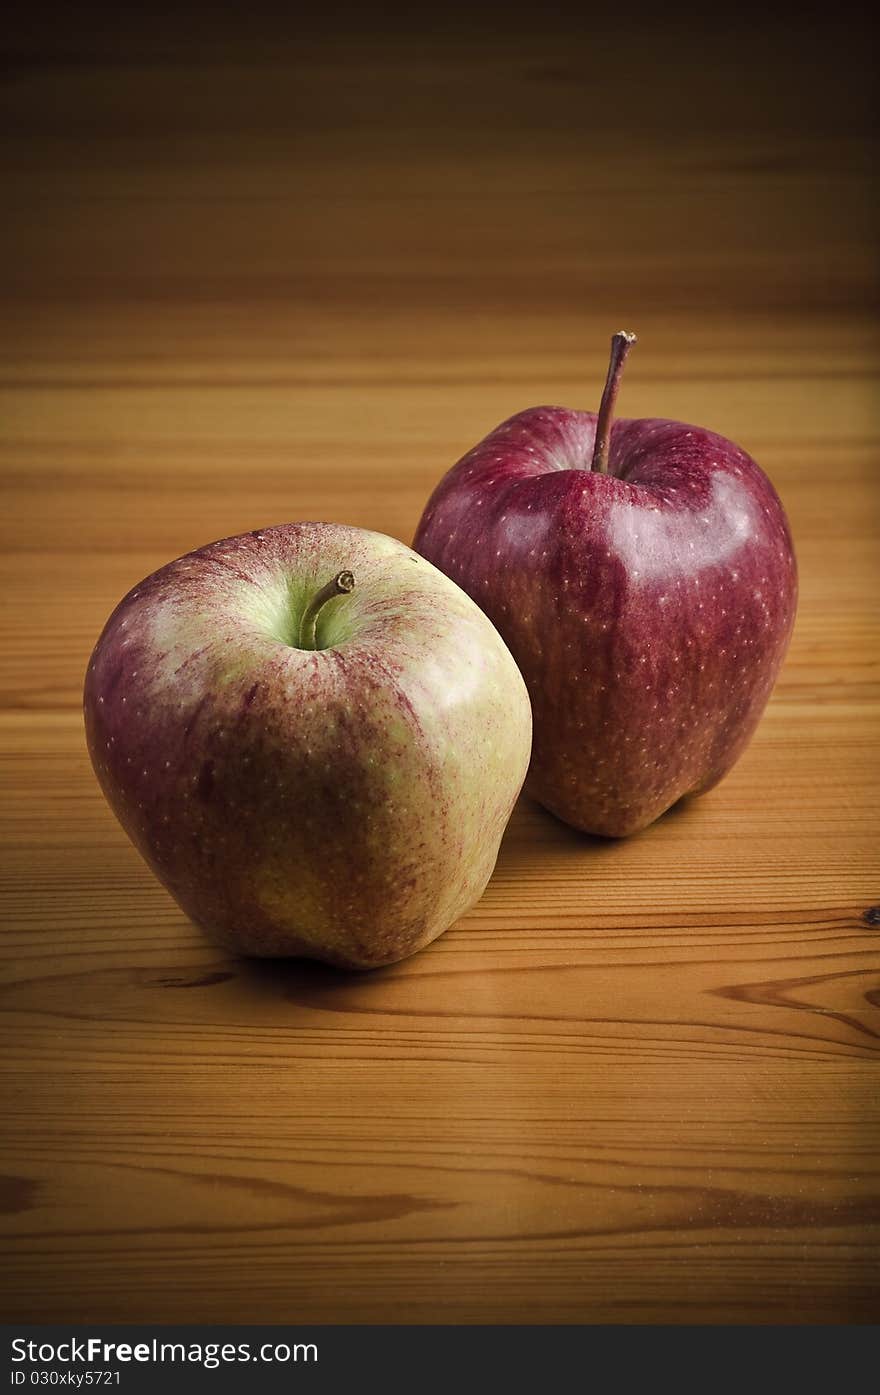 Two red apples on the wooden table. Two red apples on the wooden table